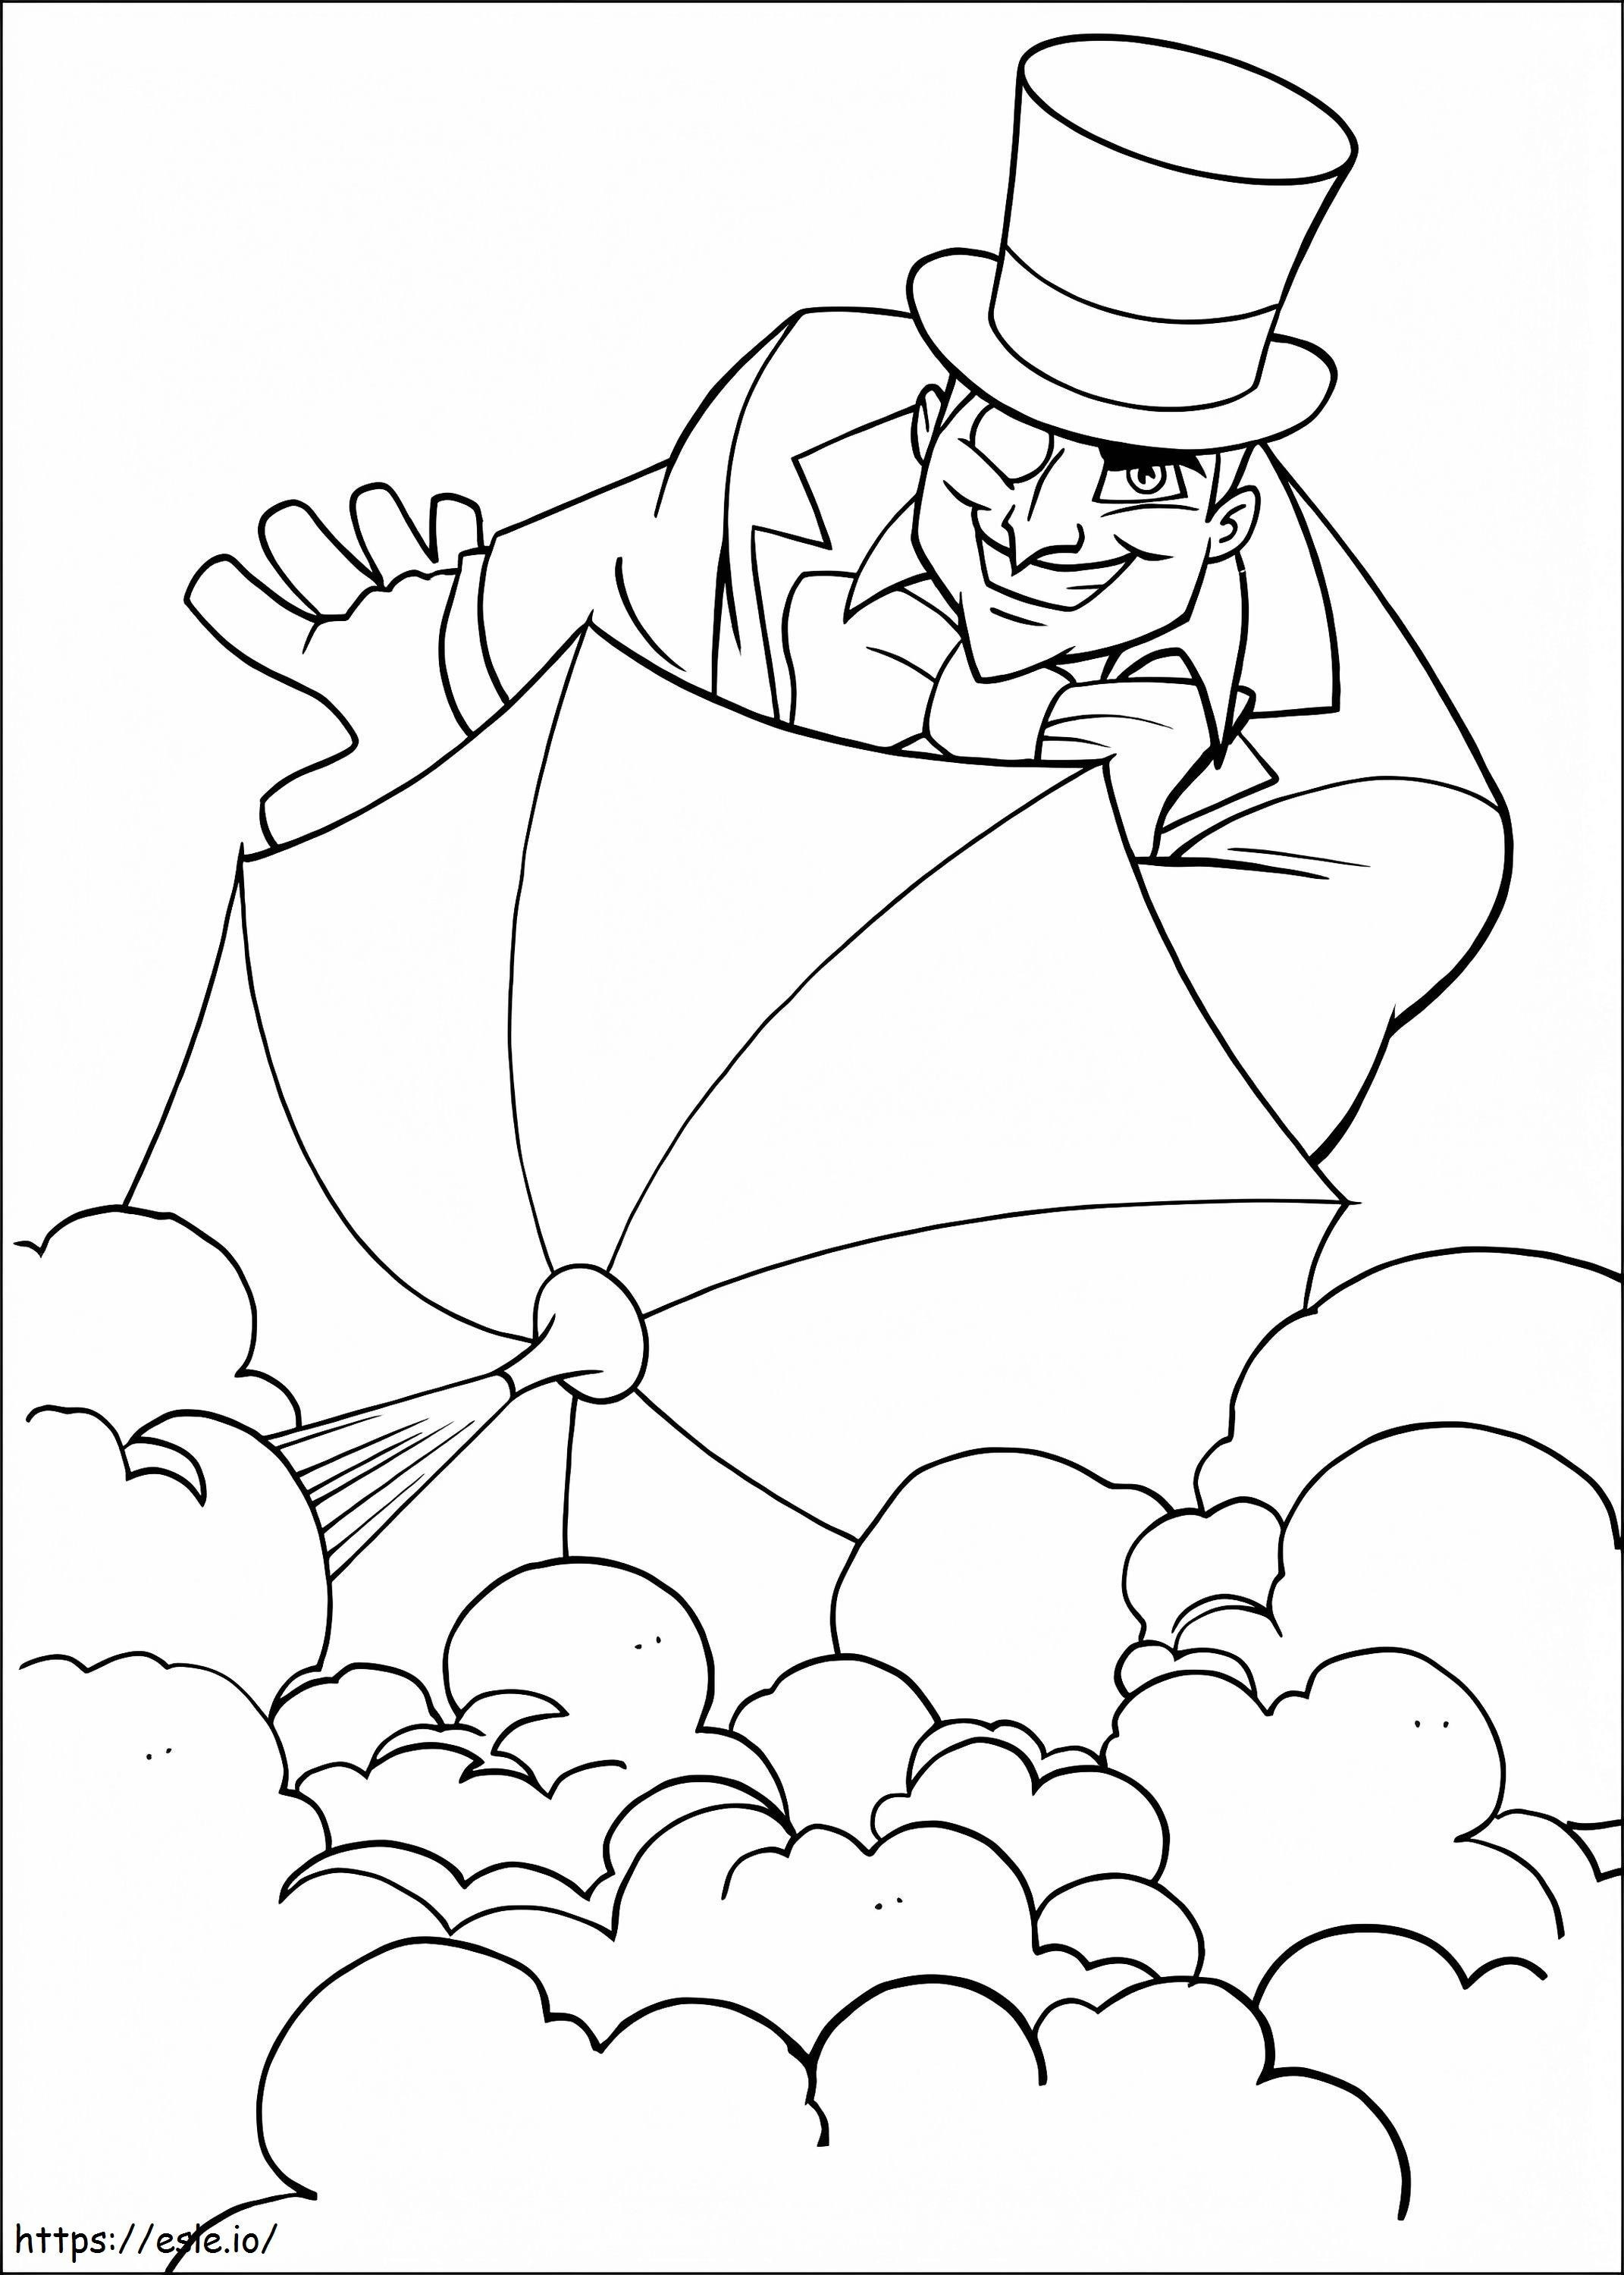 Penguin From Super Friends coloring page